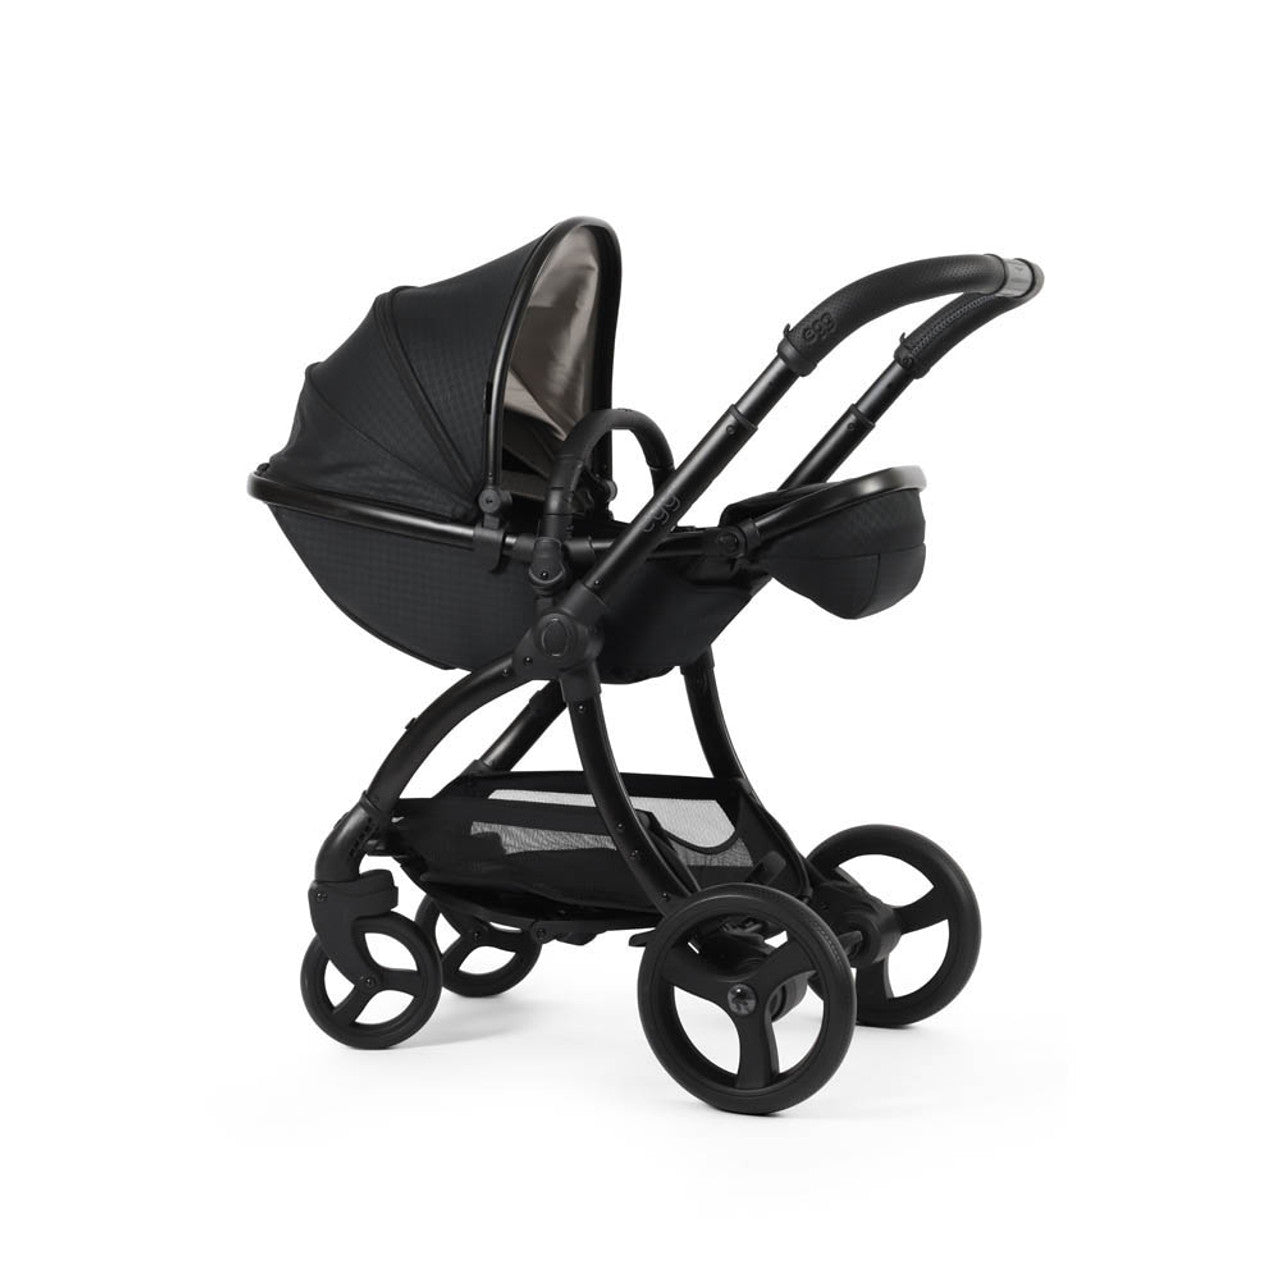 Egg® 3 Pushchair With Seat Liner Special Edition - Houndstooth Black -  | For Your Little One